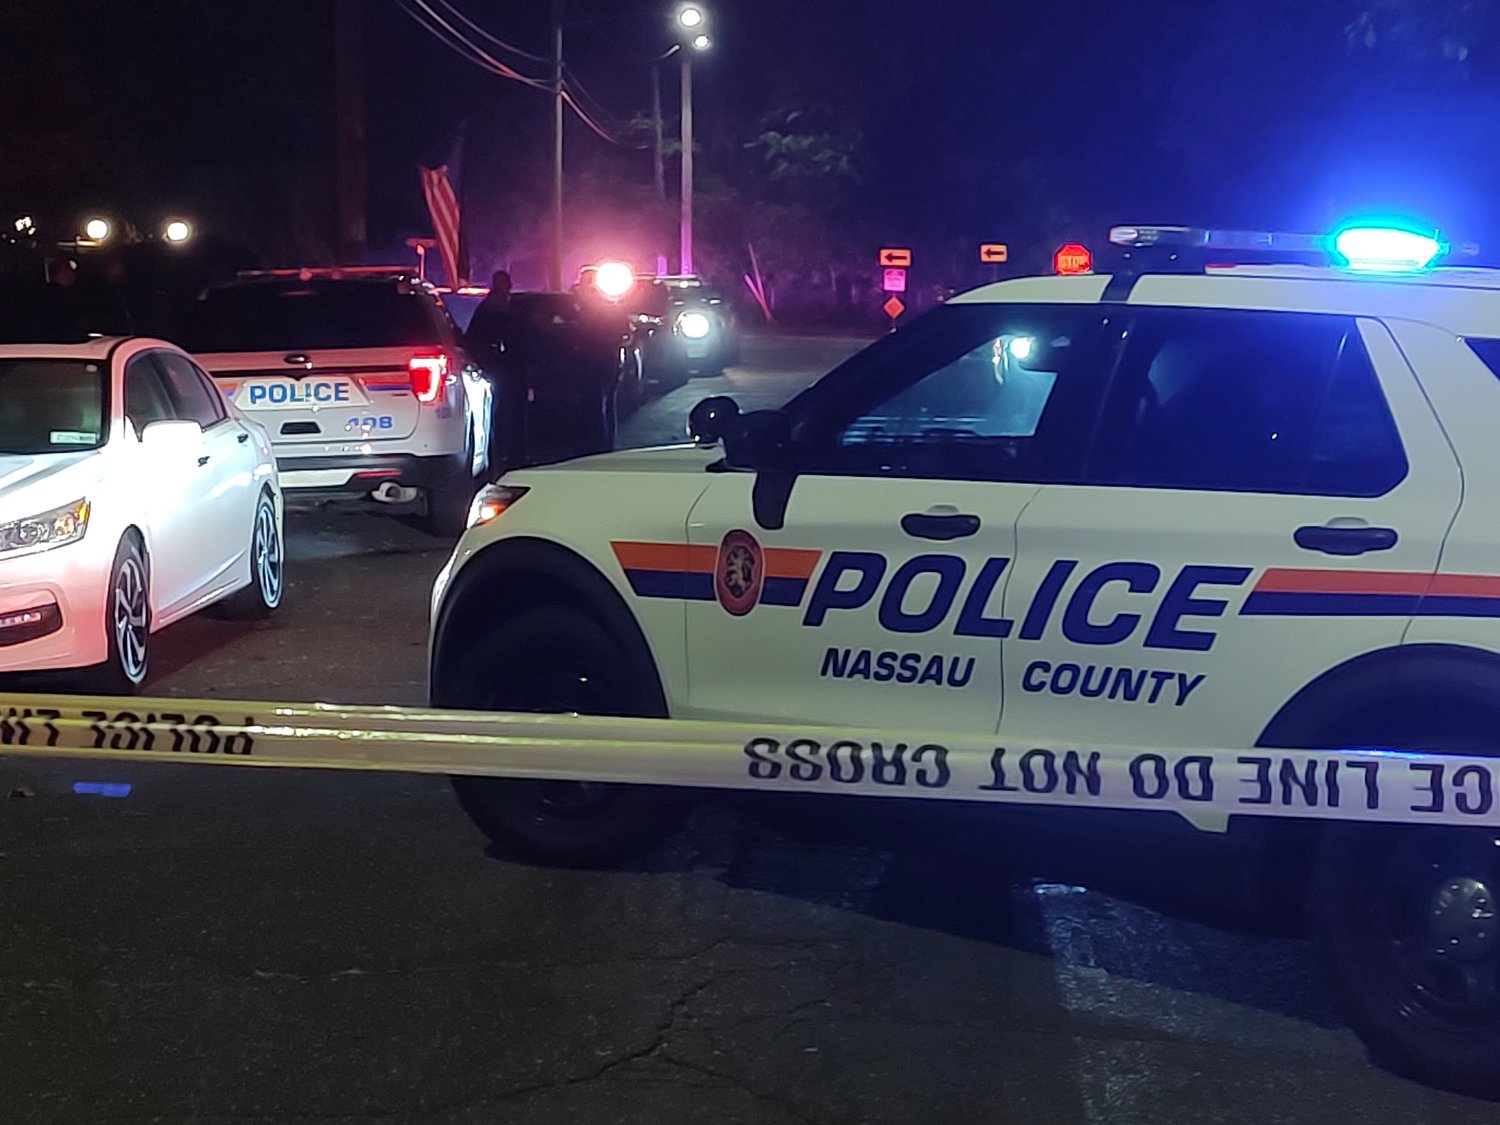 Police report that a murder occurred last night in North Bellmore. A 42-year-old female victim was found stabbed to death at a home on S. Bismark Avenue.